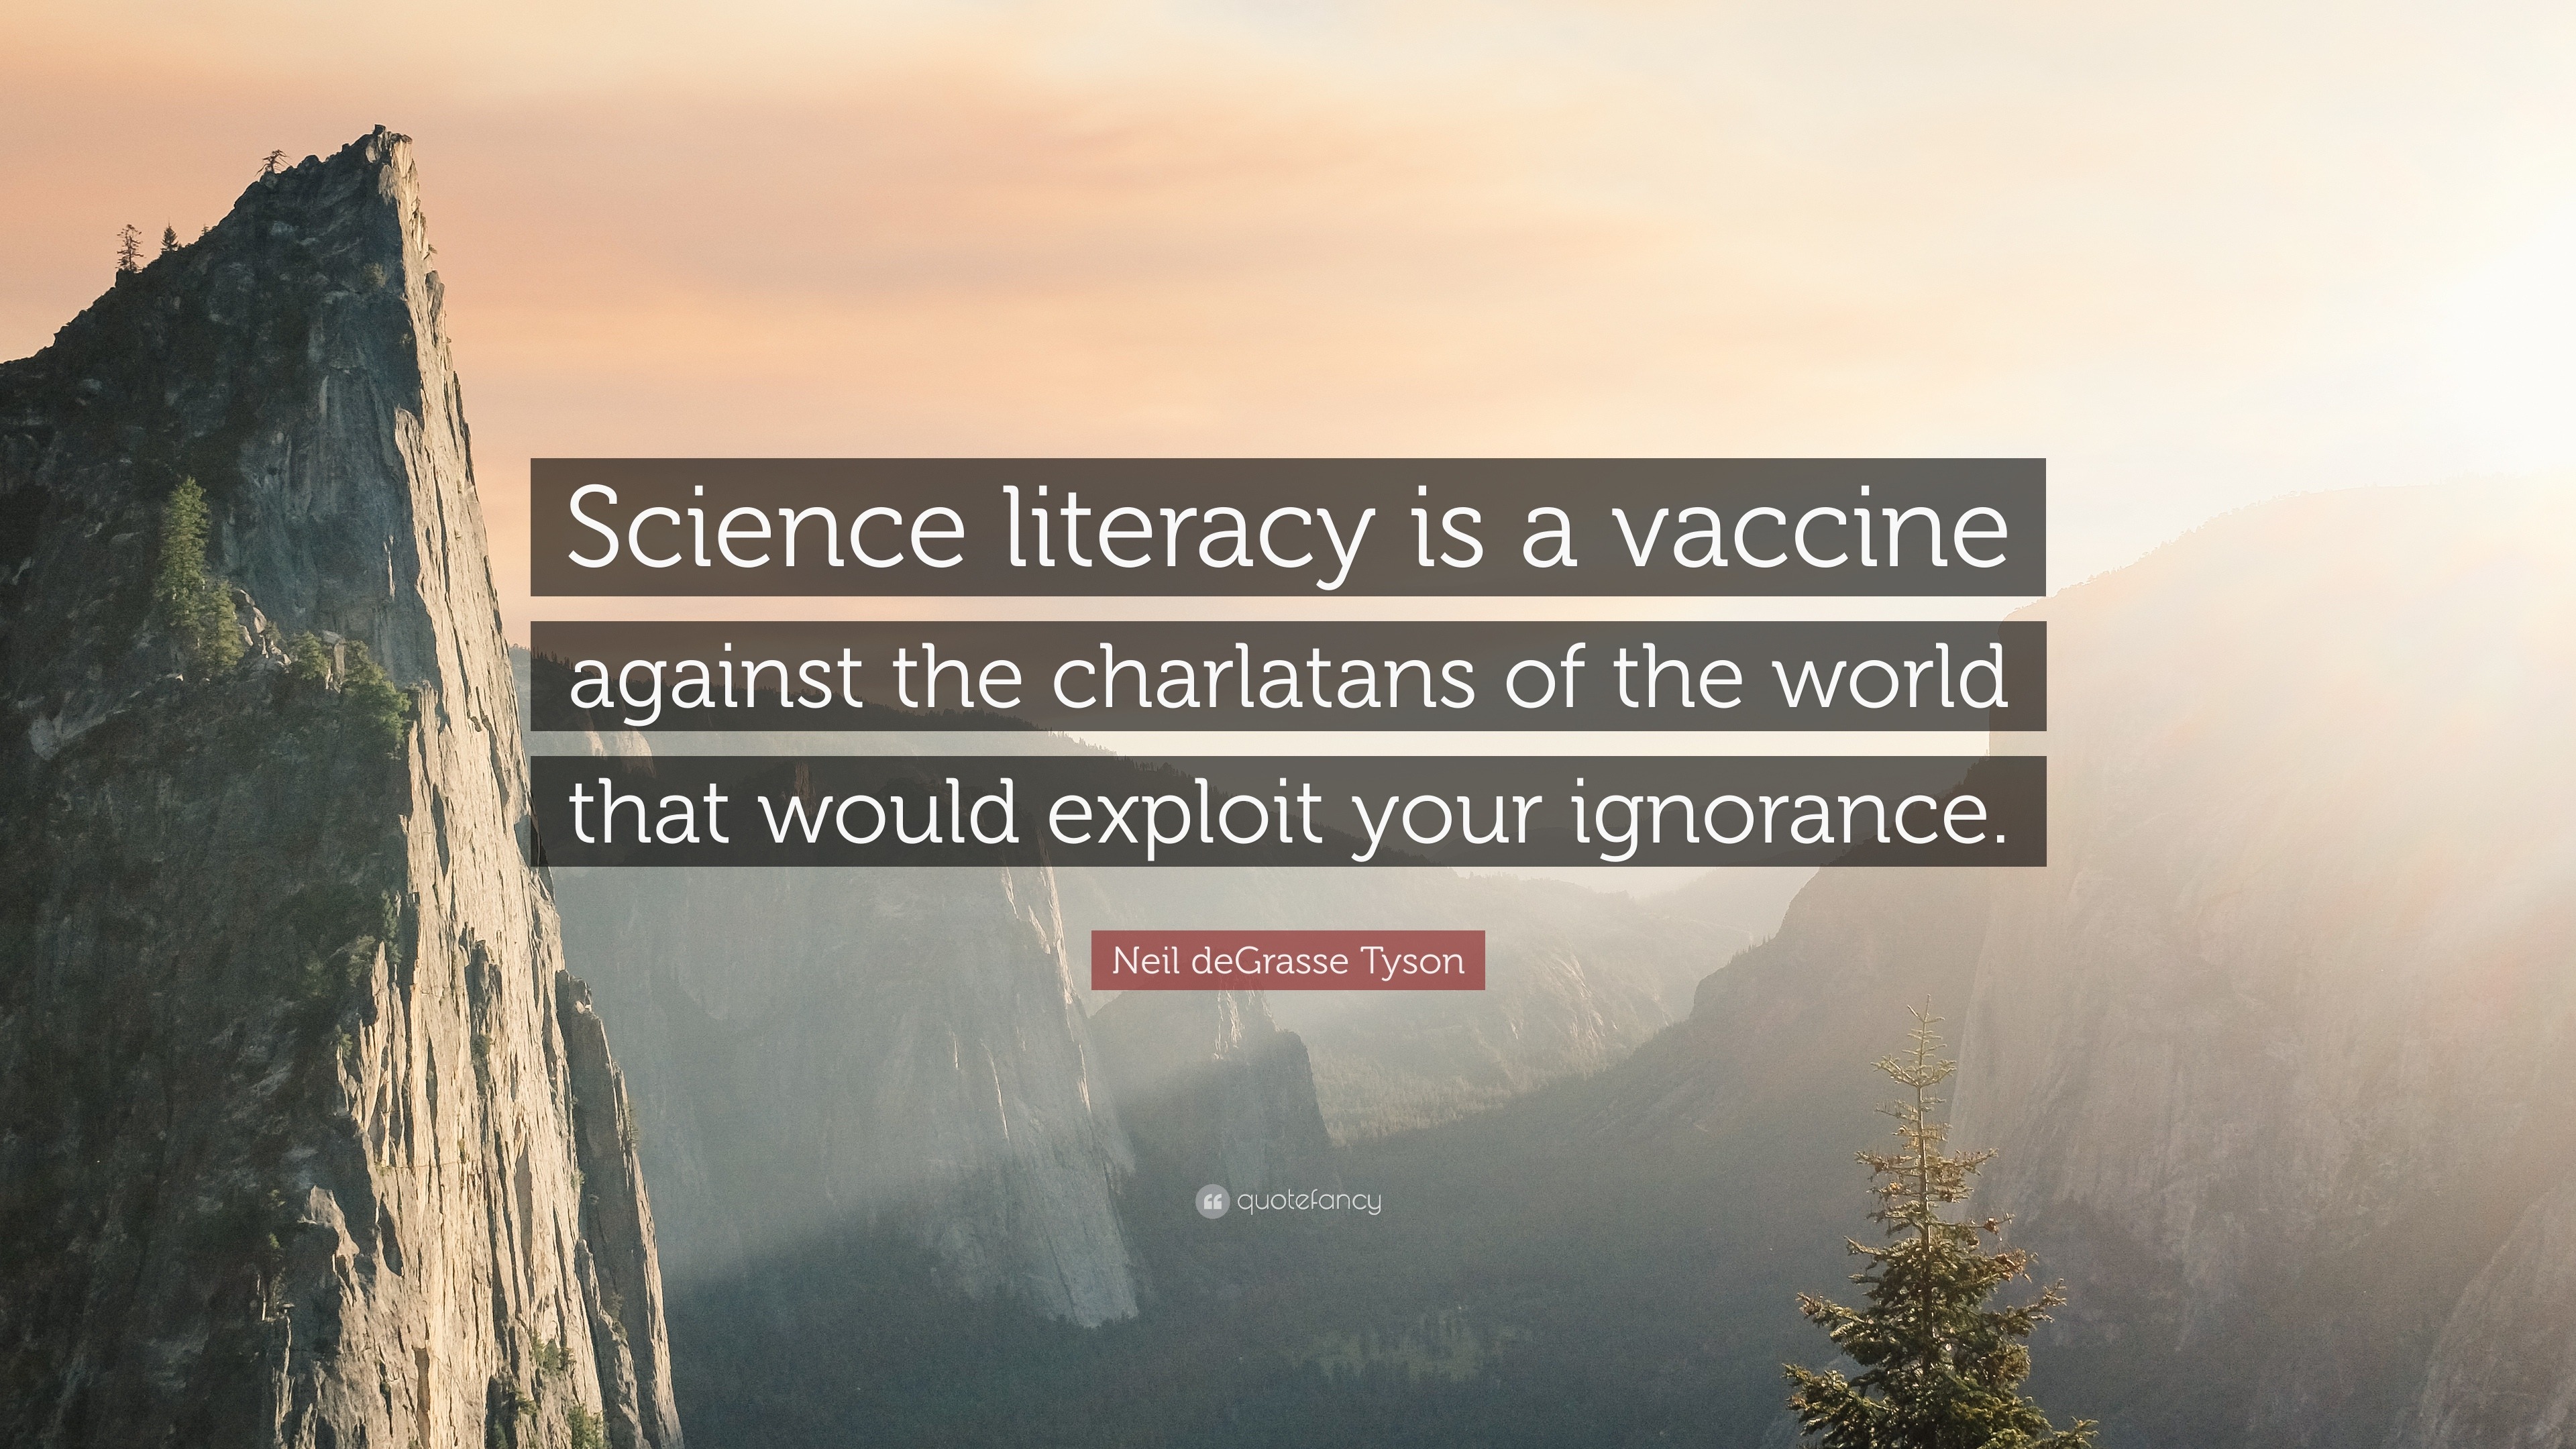 Neil deGrasse Tyson Quote: “Science literacy is a vaccine against the